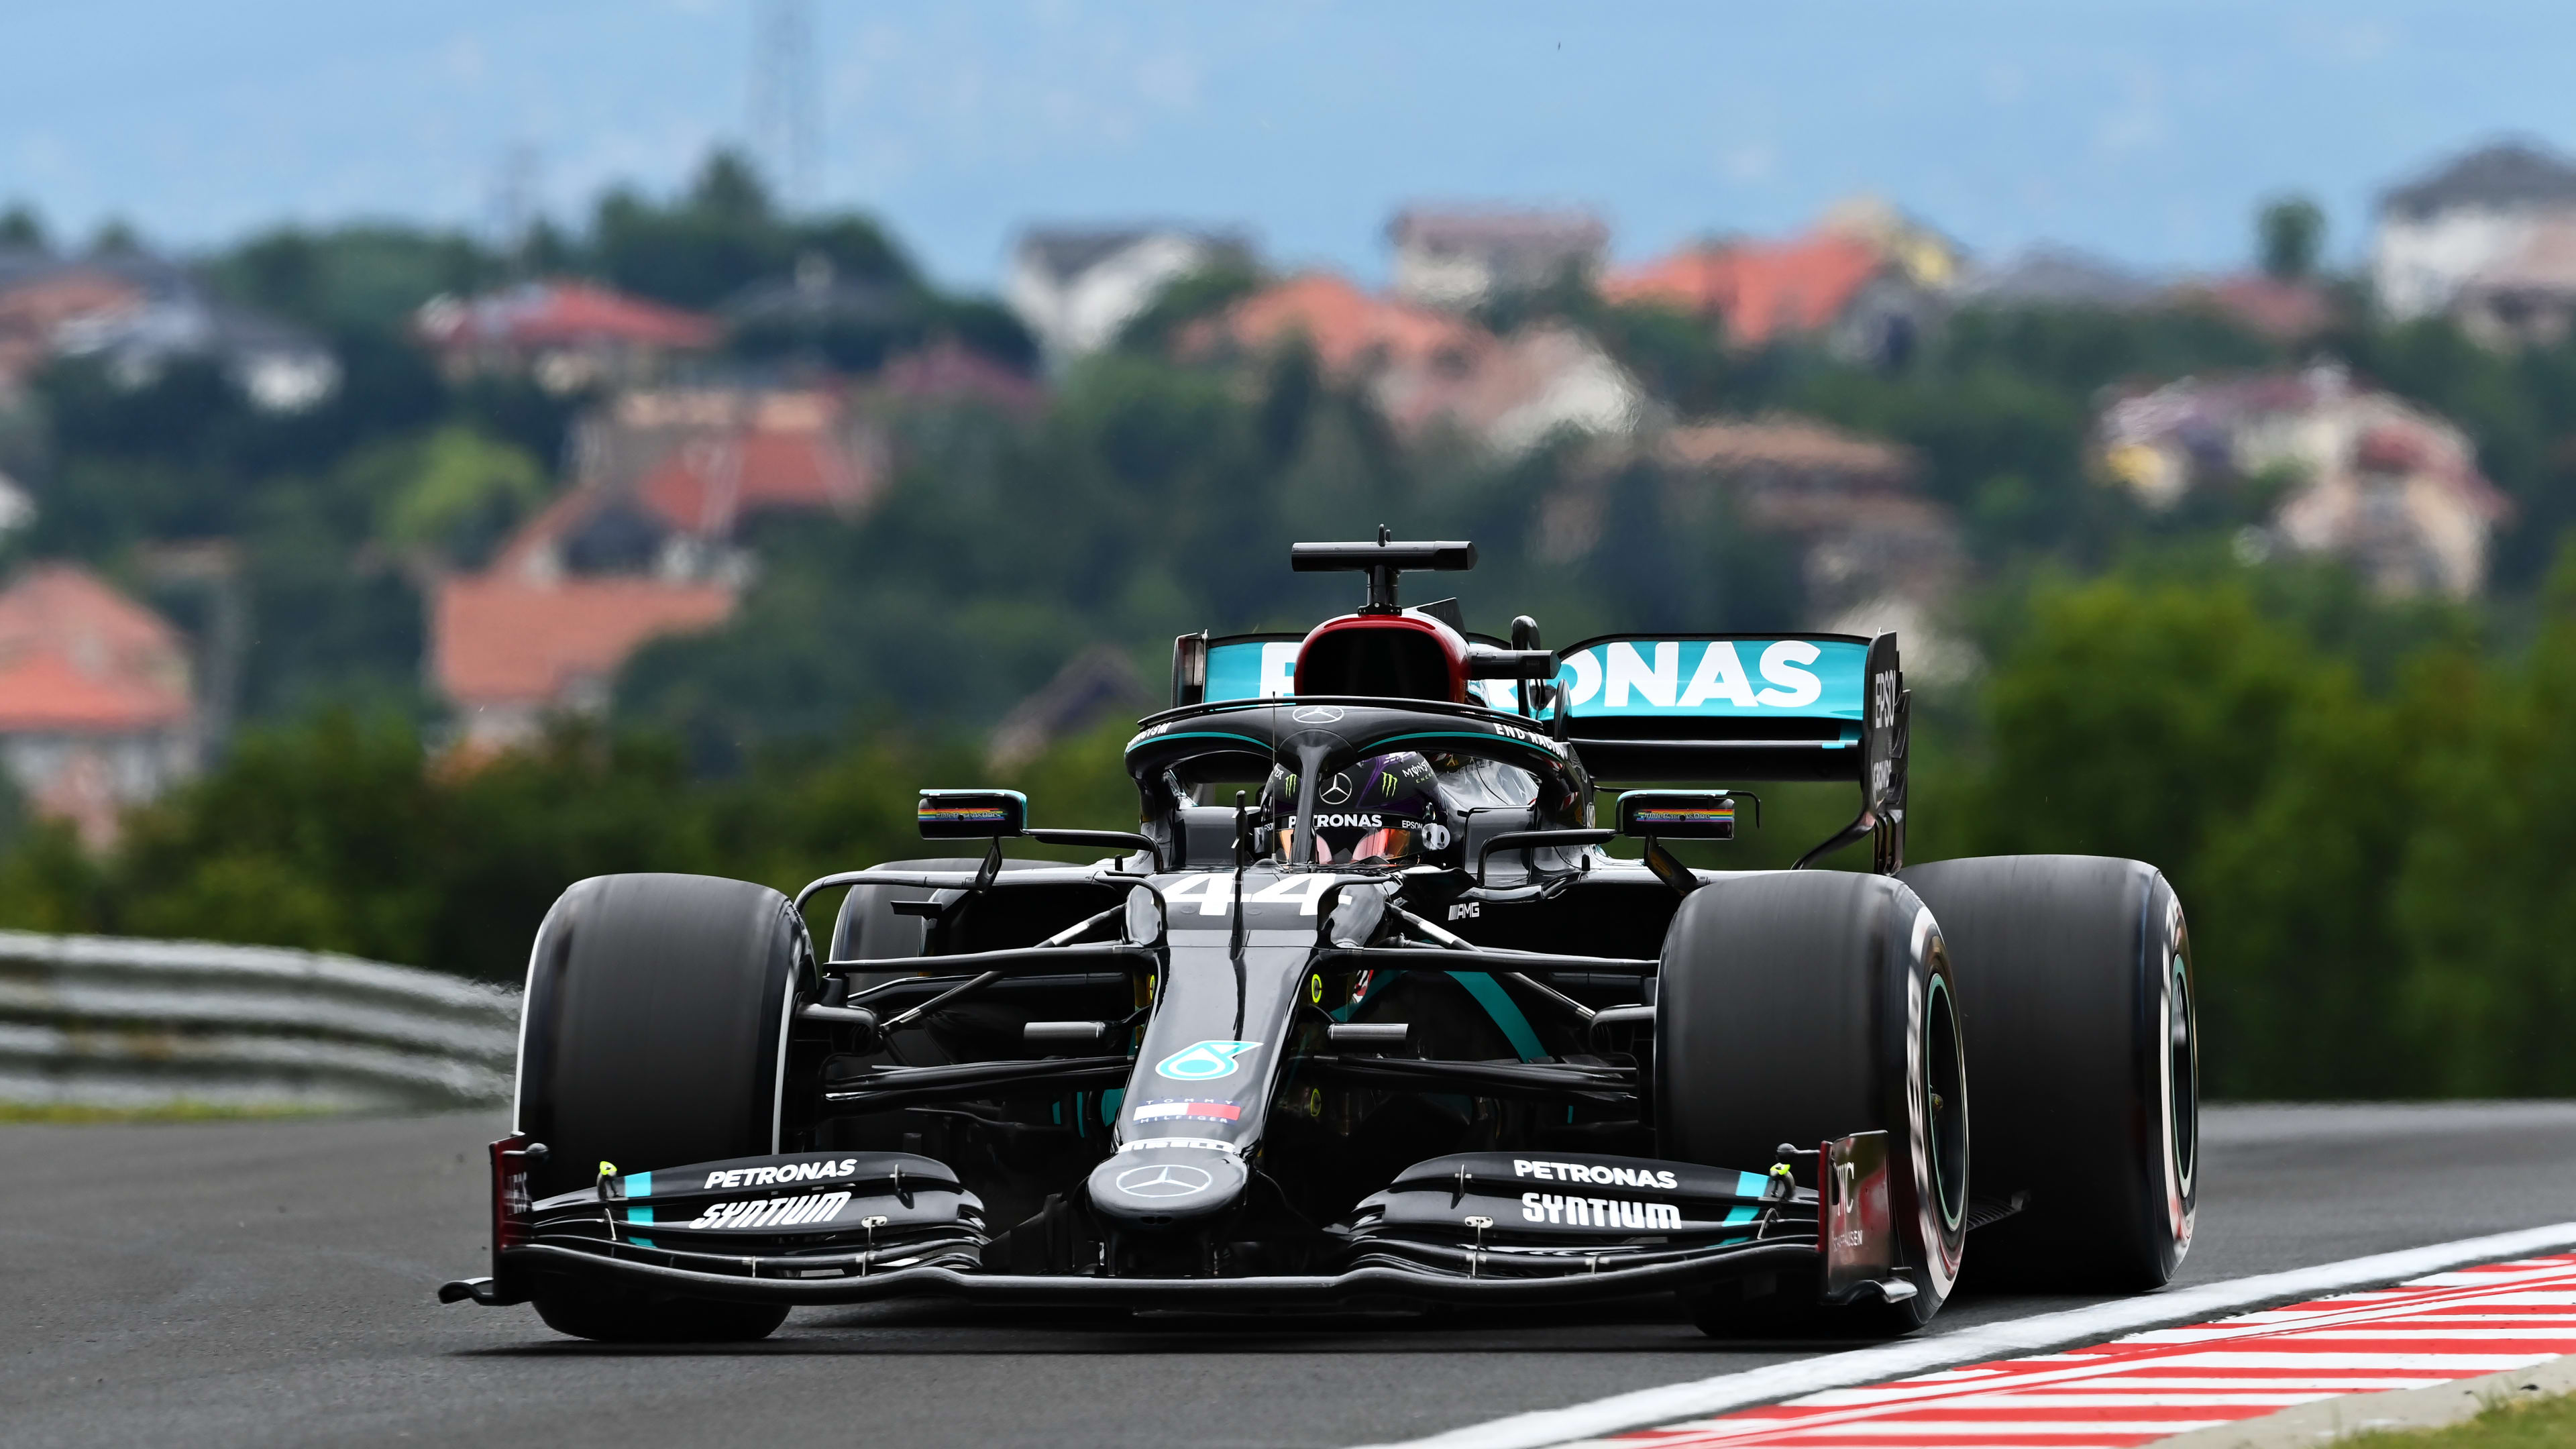 2020 Hungarian Grand Prix FP1 report and highlights Mercedes take 1-2 ahead of Racing Points in first practice at the Hungaroring Formula 1®